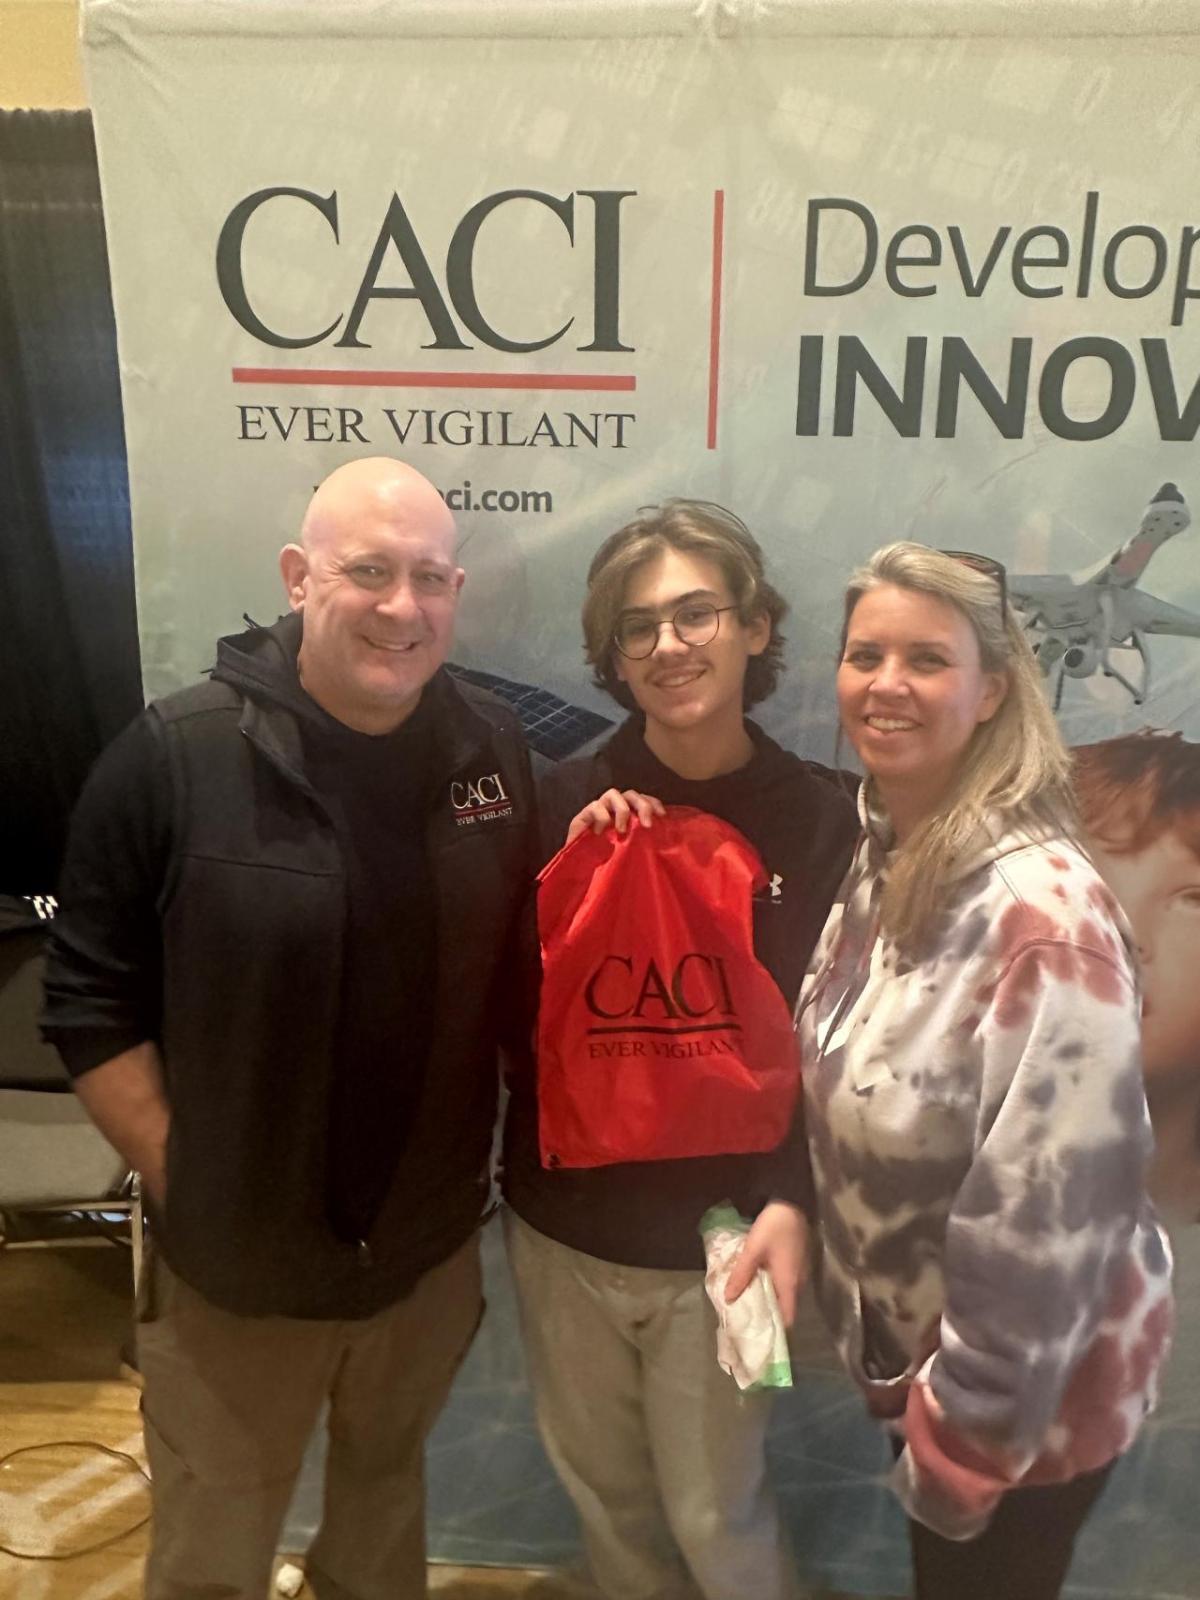 A group of three pose in front of a CACI banner, holding a CACI bag.